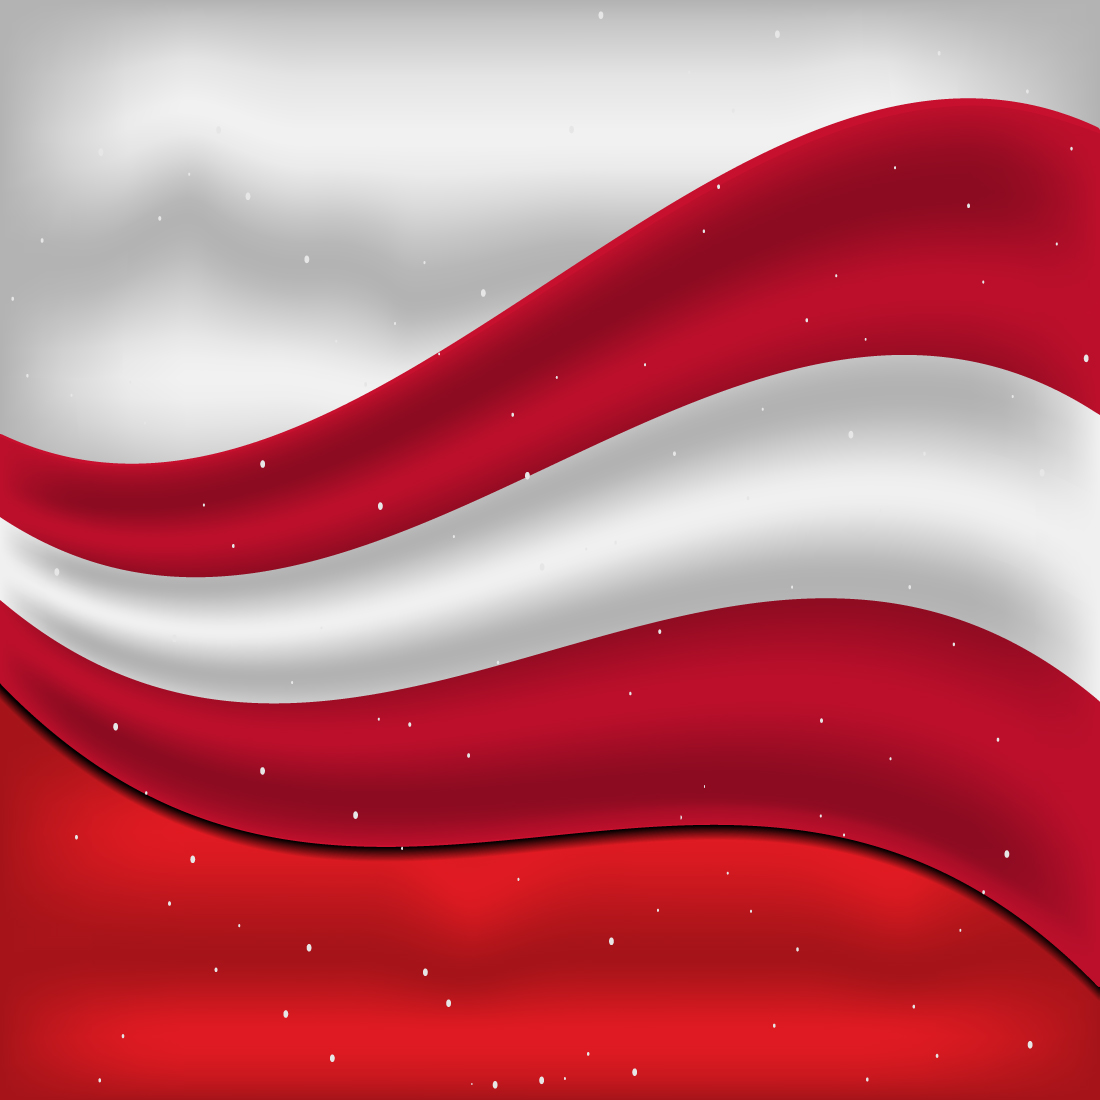 Magnificent image of the flag of Austria.